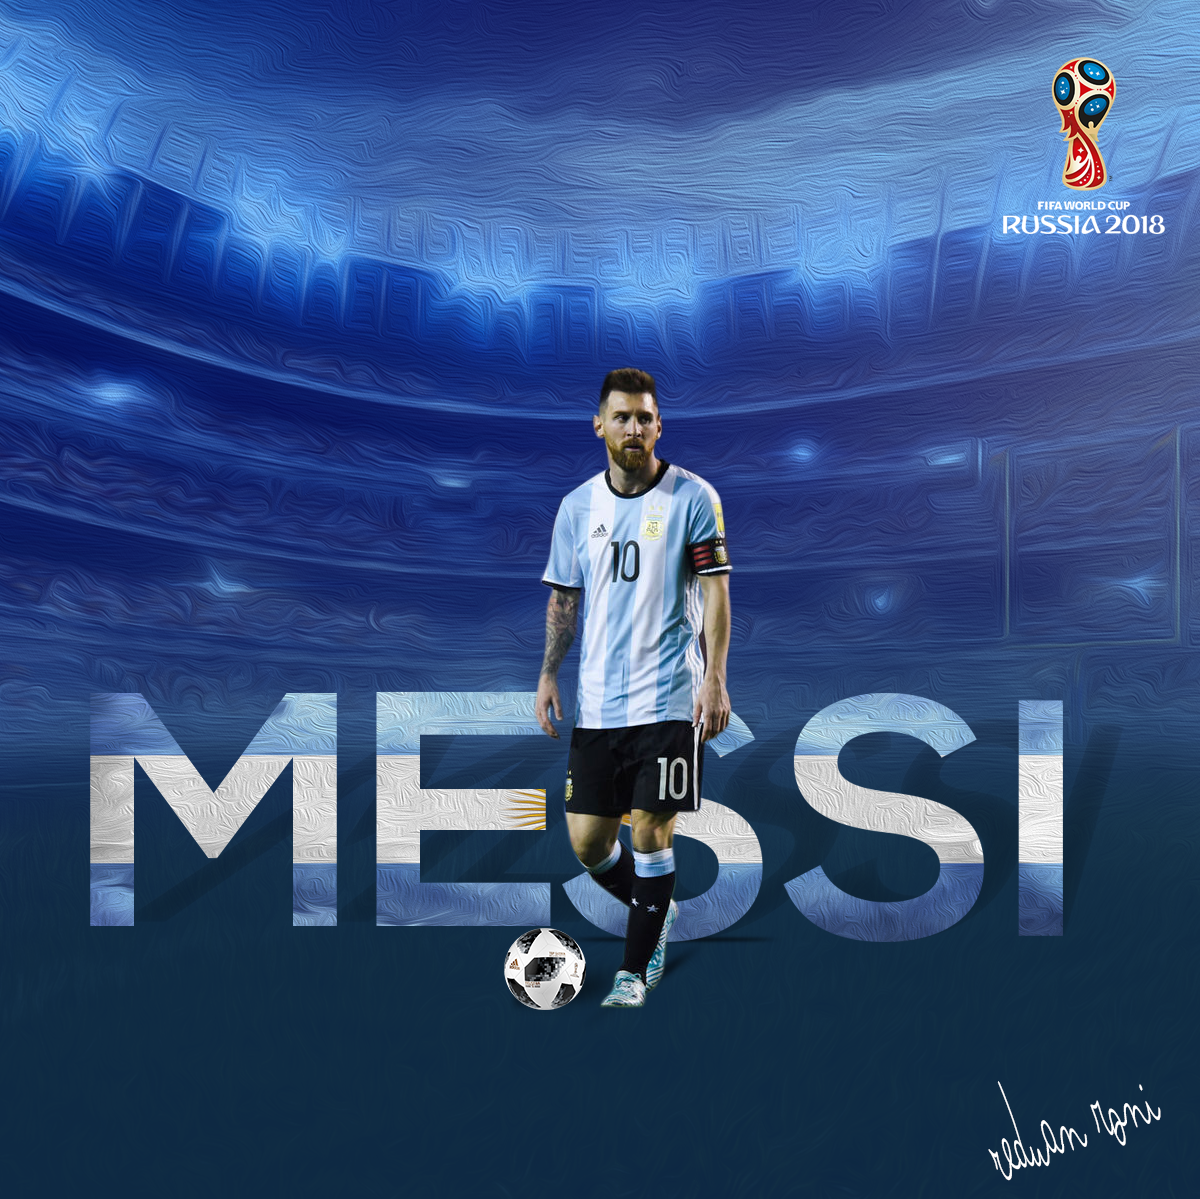 Argentina World Cup Wallpaper On